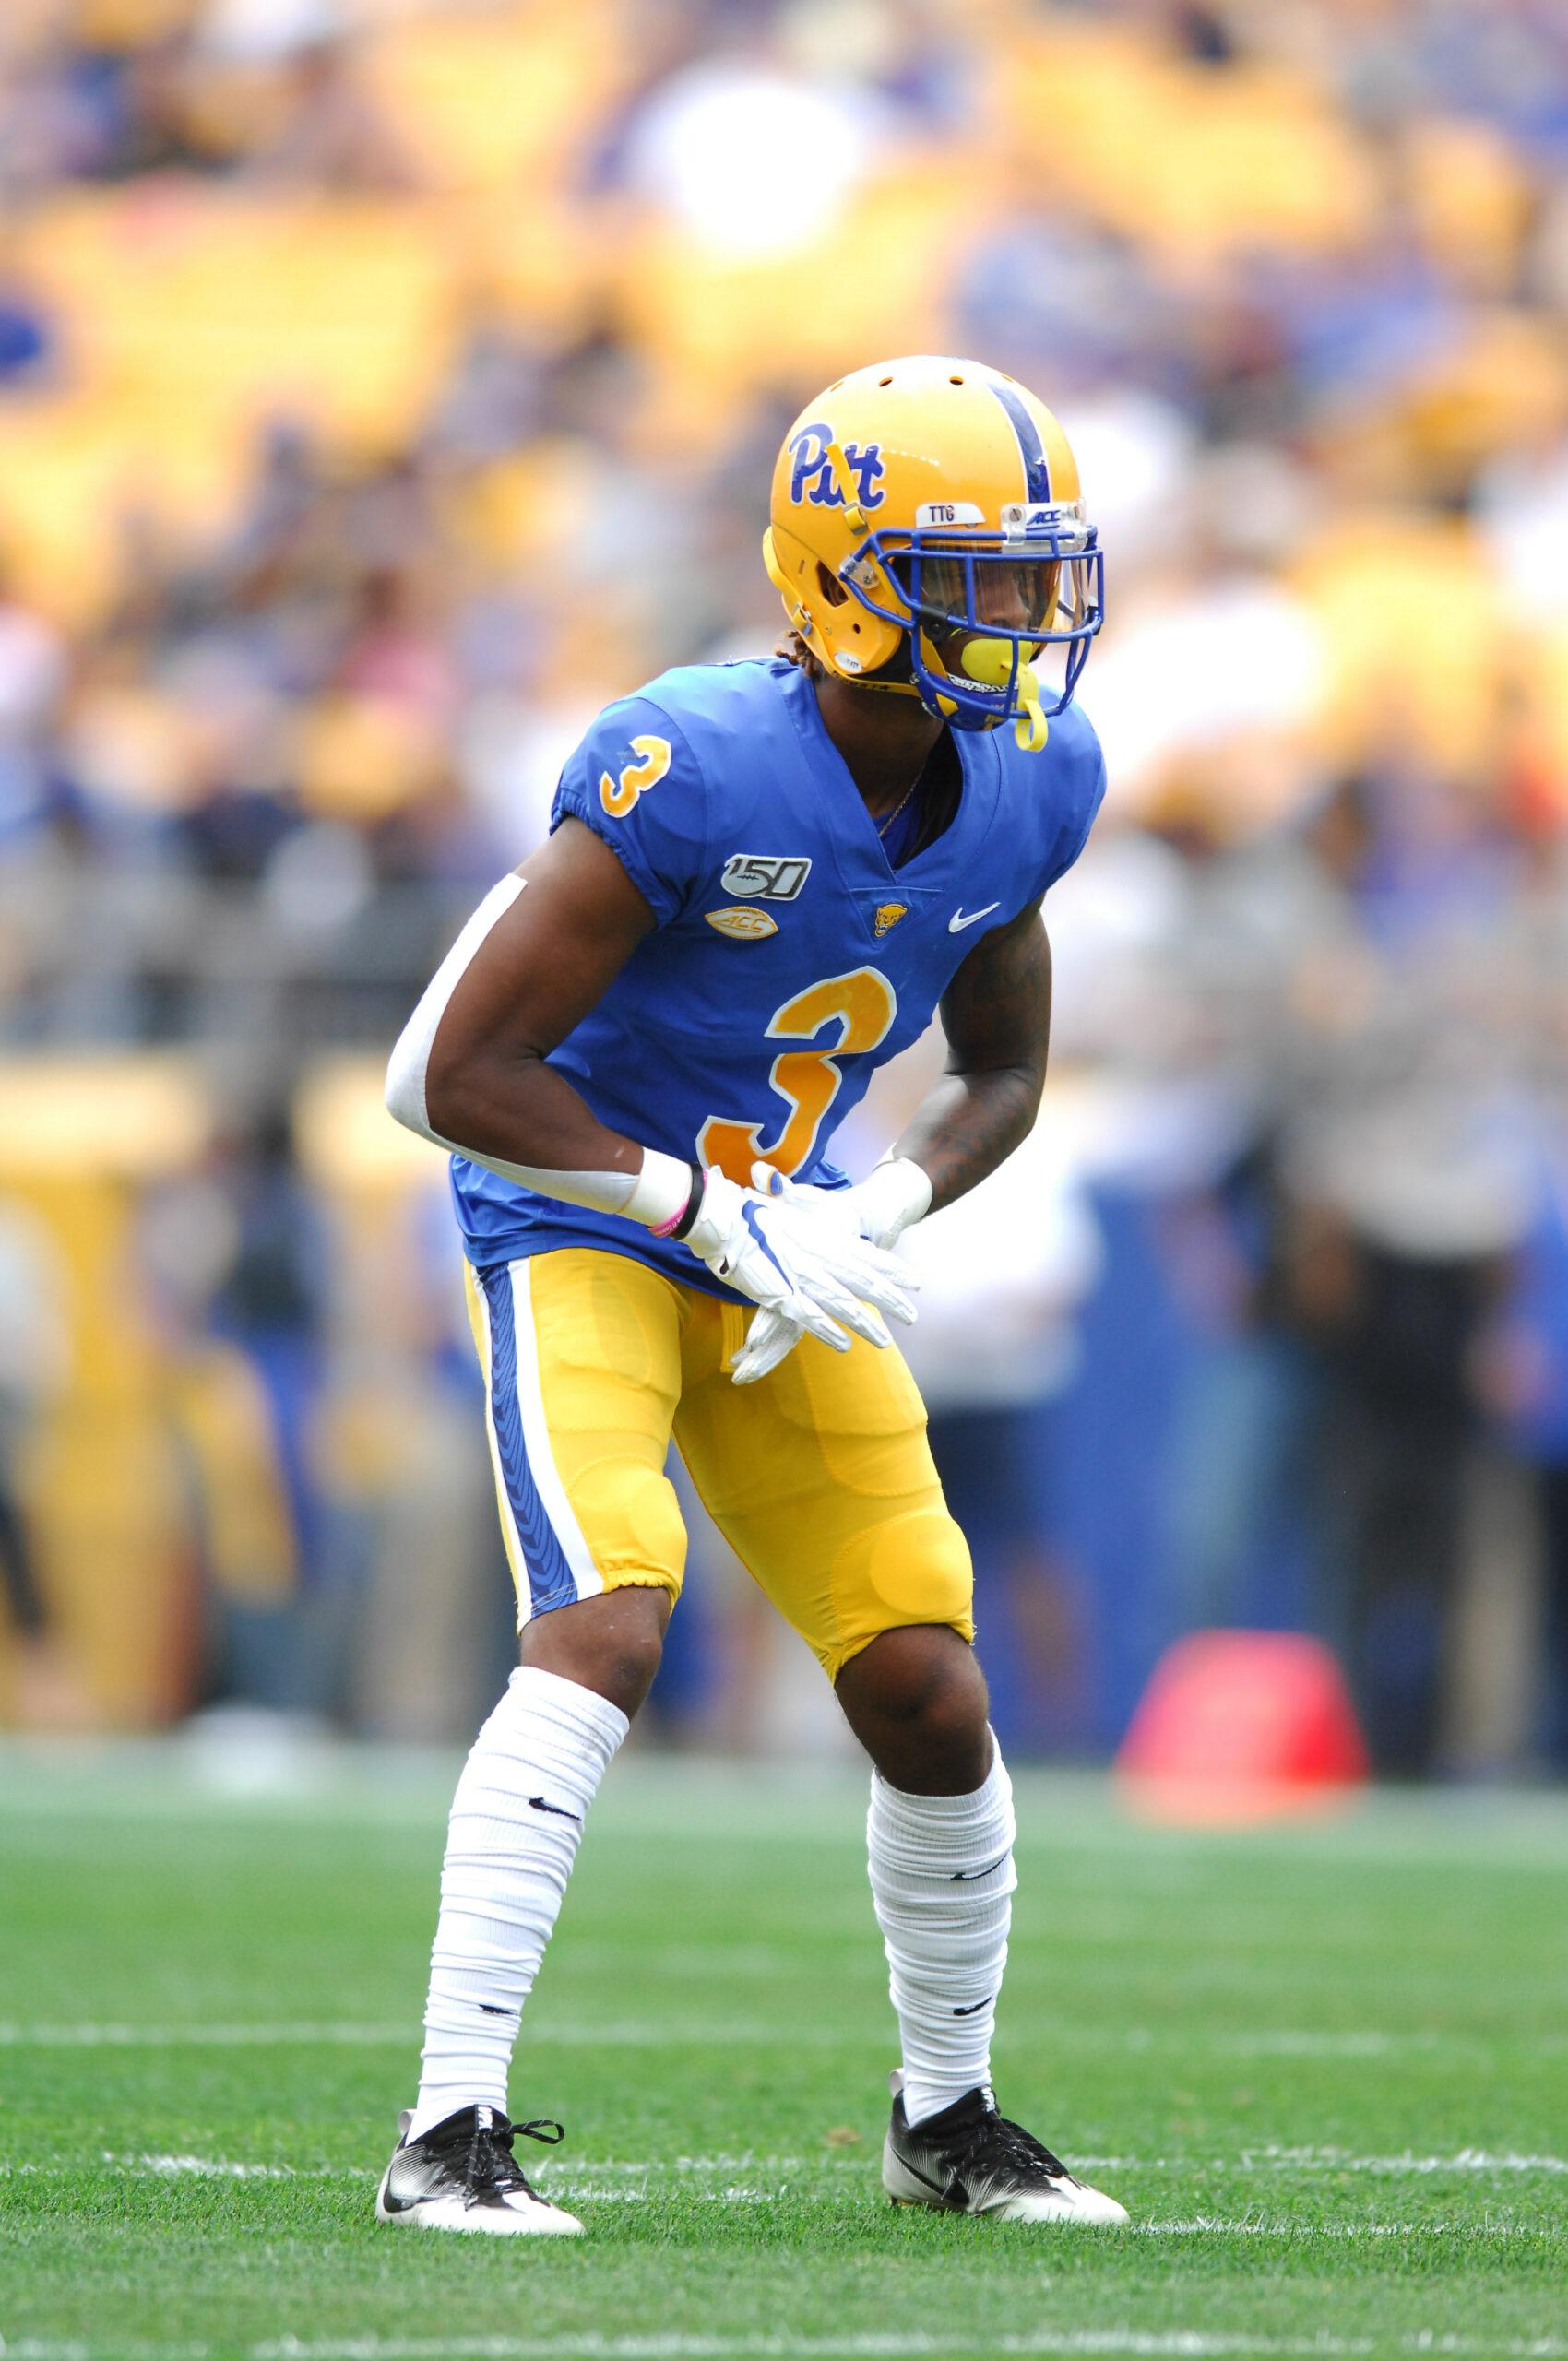 Damar Hamlin #3 during the Pitt Panthers vs Delaware Blue Hens at Heinz Field in Pittsburgh, PA.